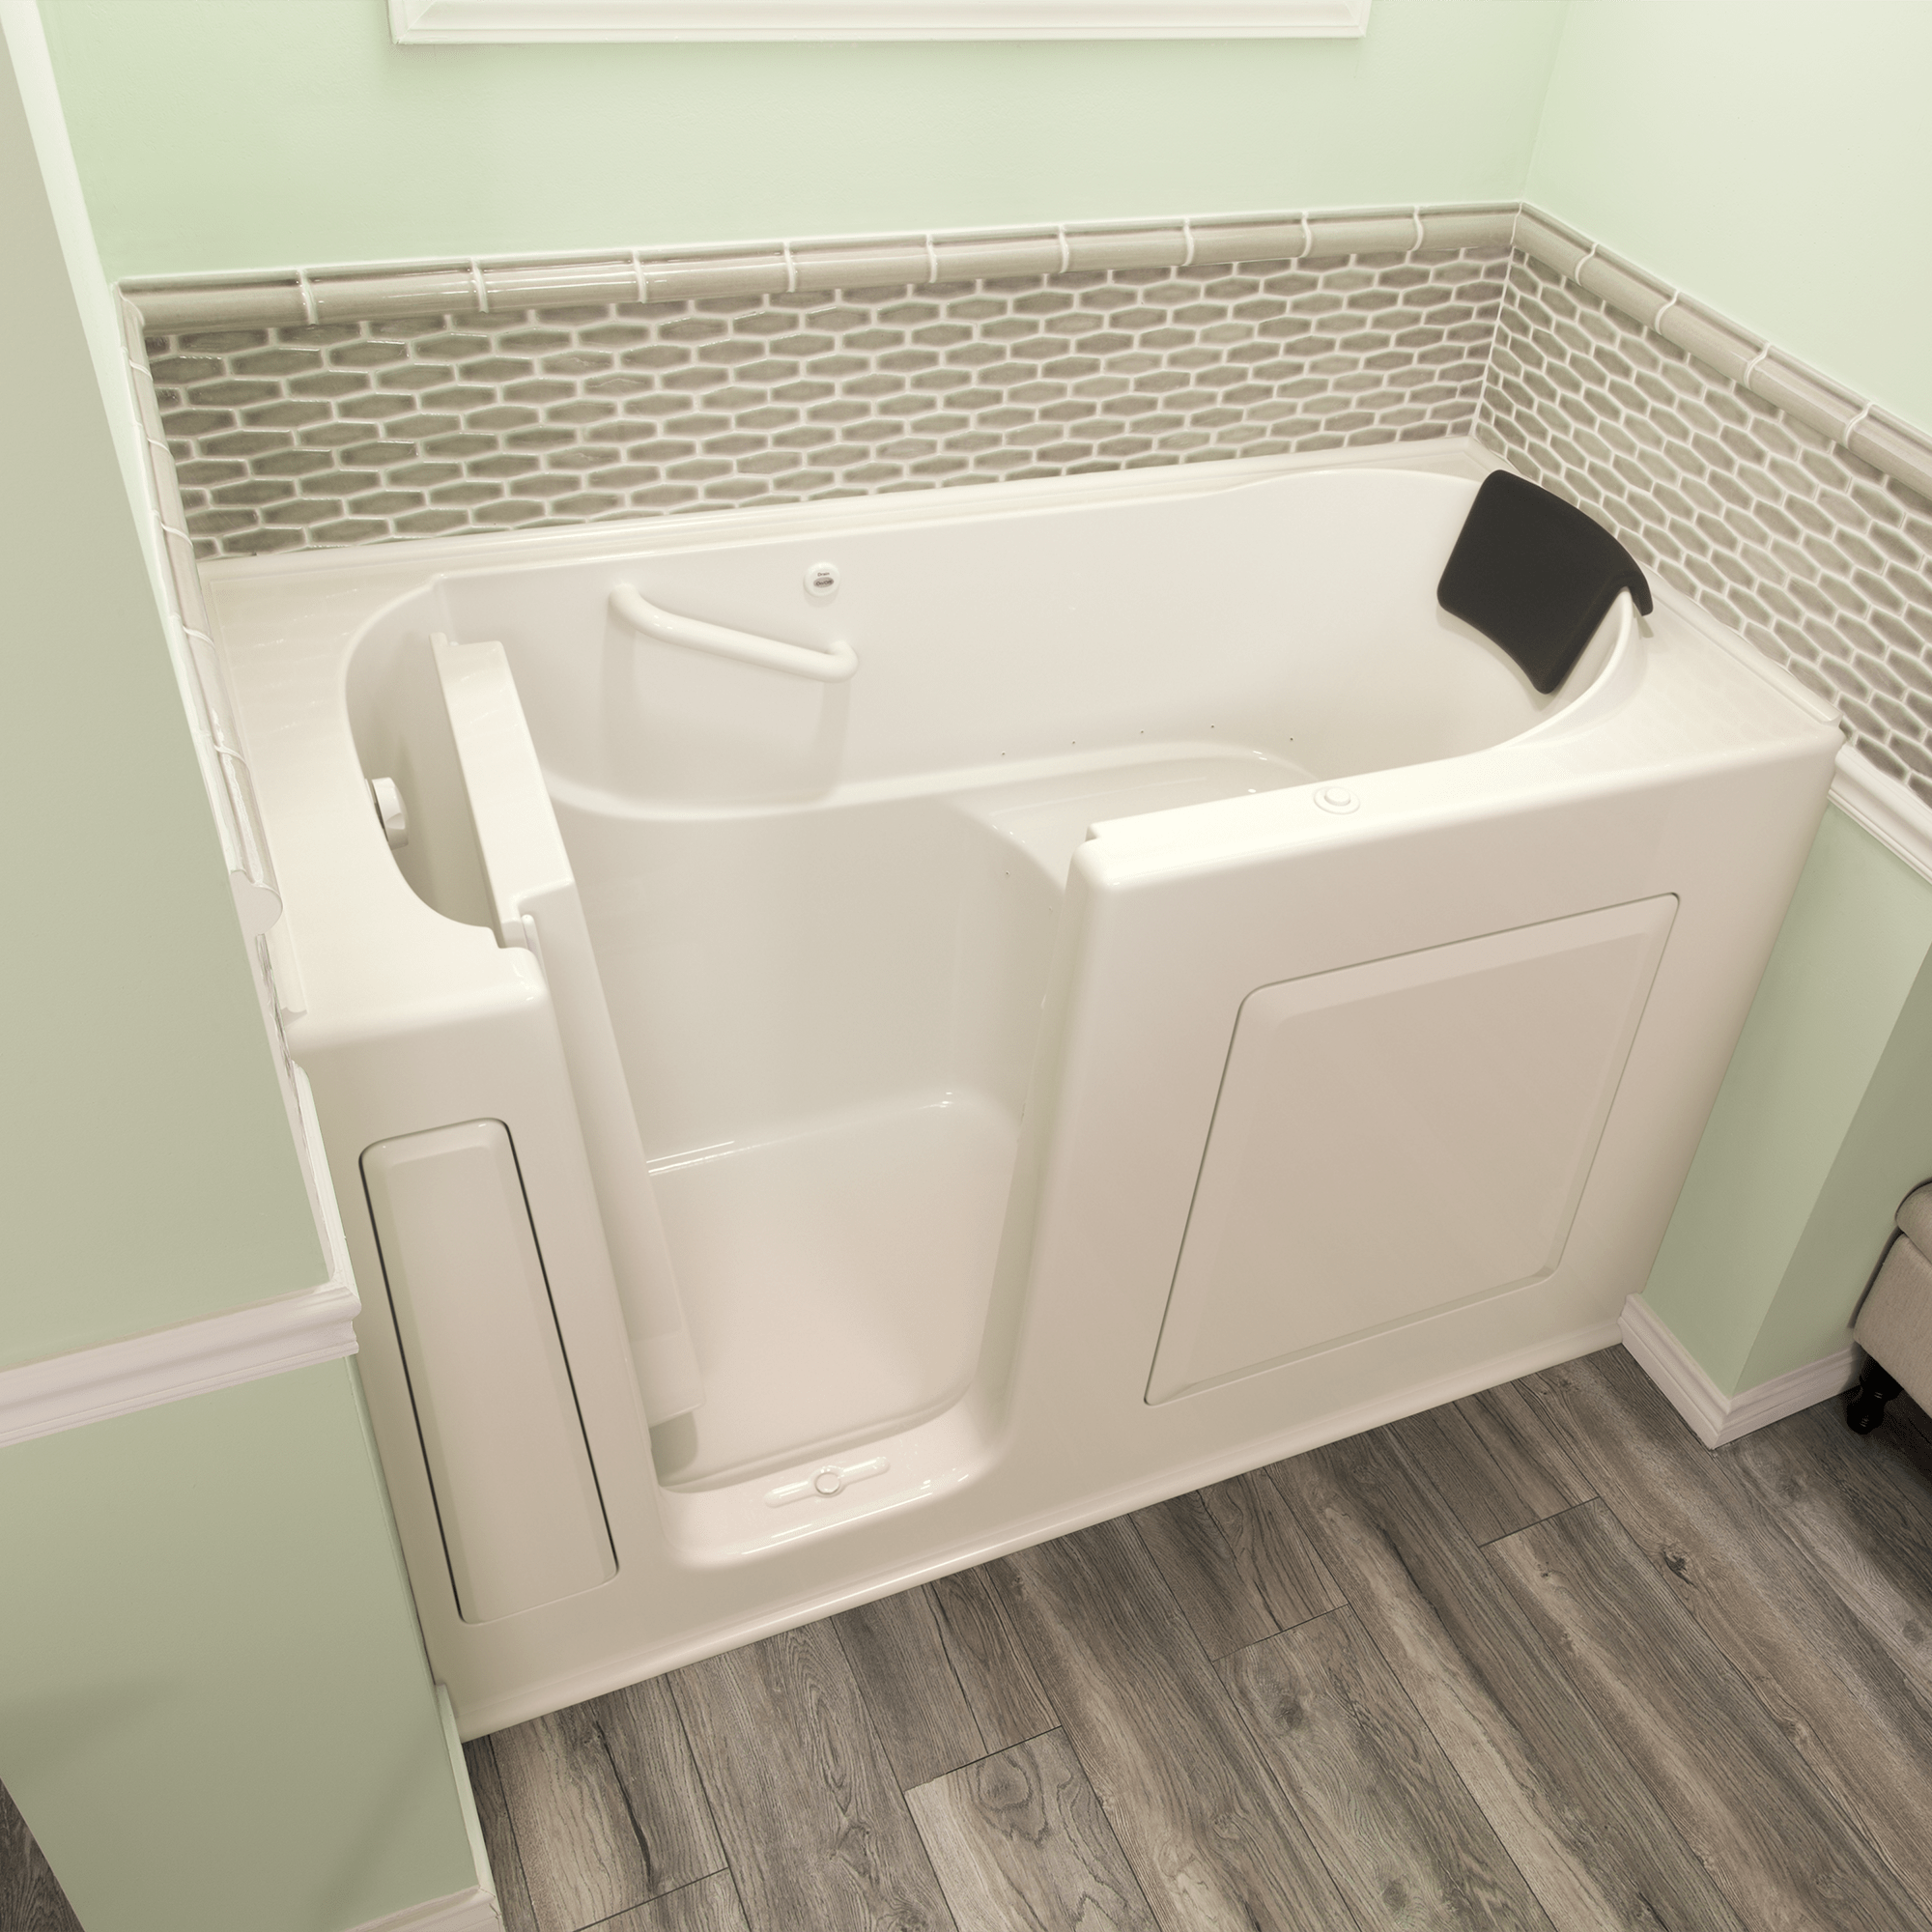 Gelcoat Premium Series 30 x 60 -Inch Walk-in Tub With Air Spa System - Left-Hand Drain